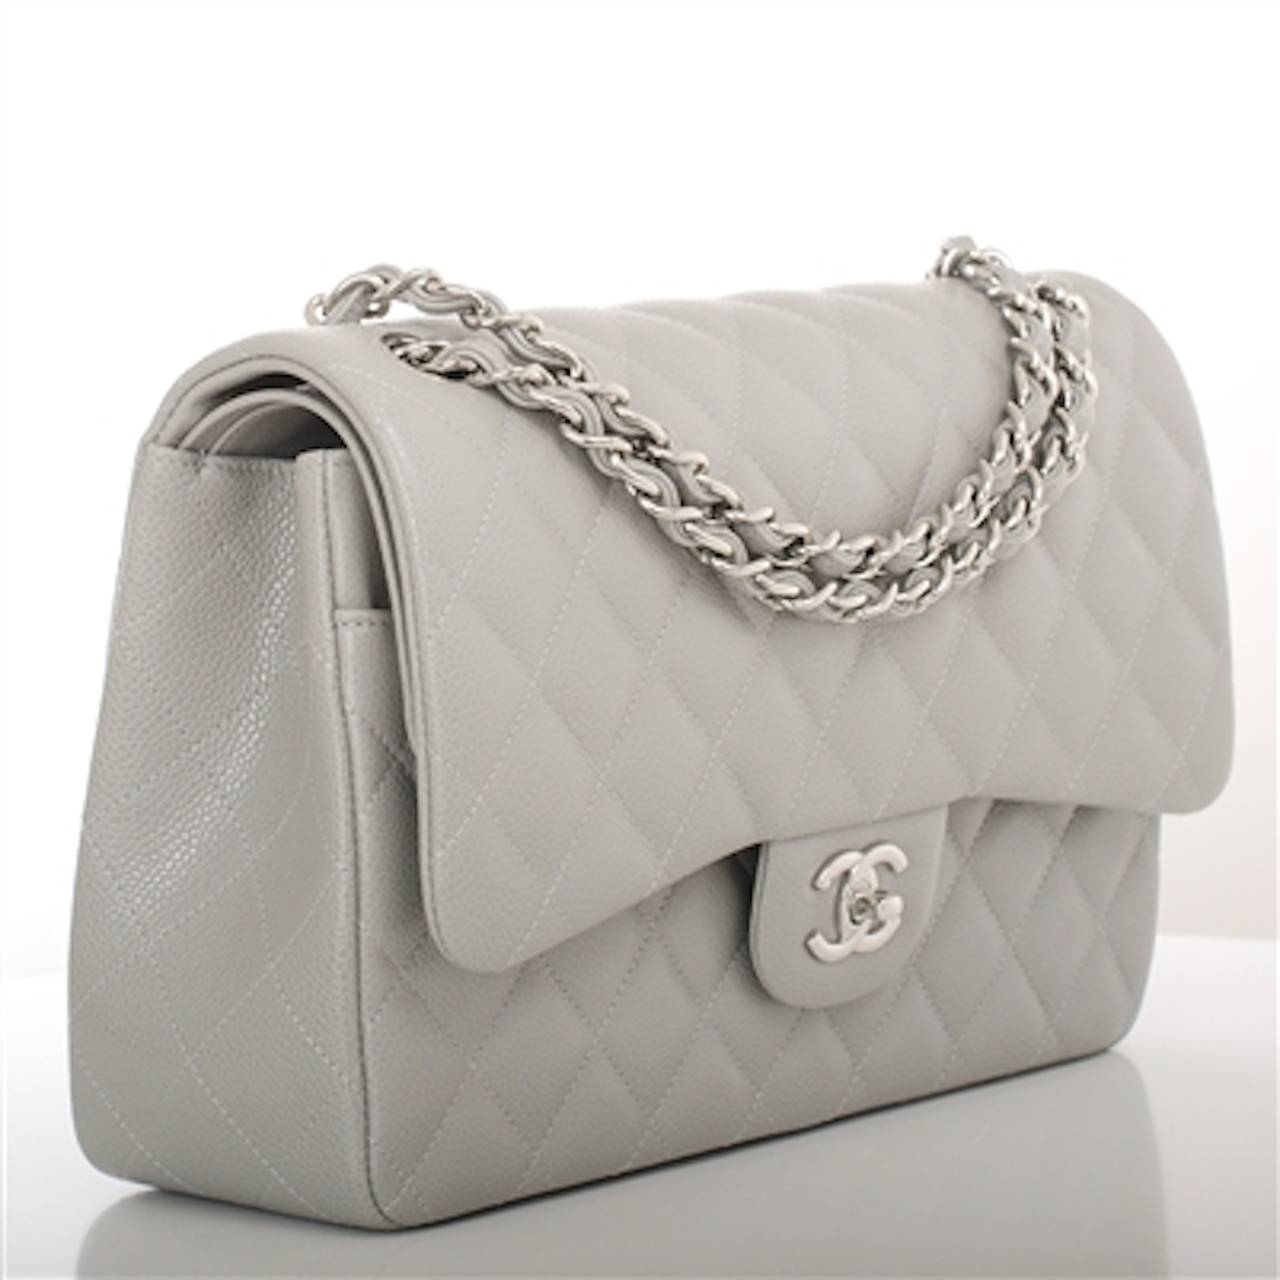 Chanel light grey Jumbo Classic double flap bag of quilted caviar leather with silver tone hardware.

This Jumbo Classic double flap of light grey quilted caviar leather features a front flap with signature CC turnlock closure, half moon back